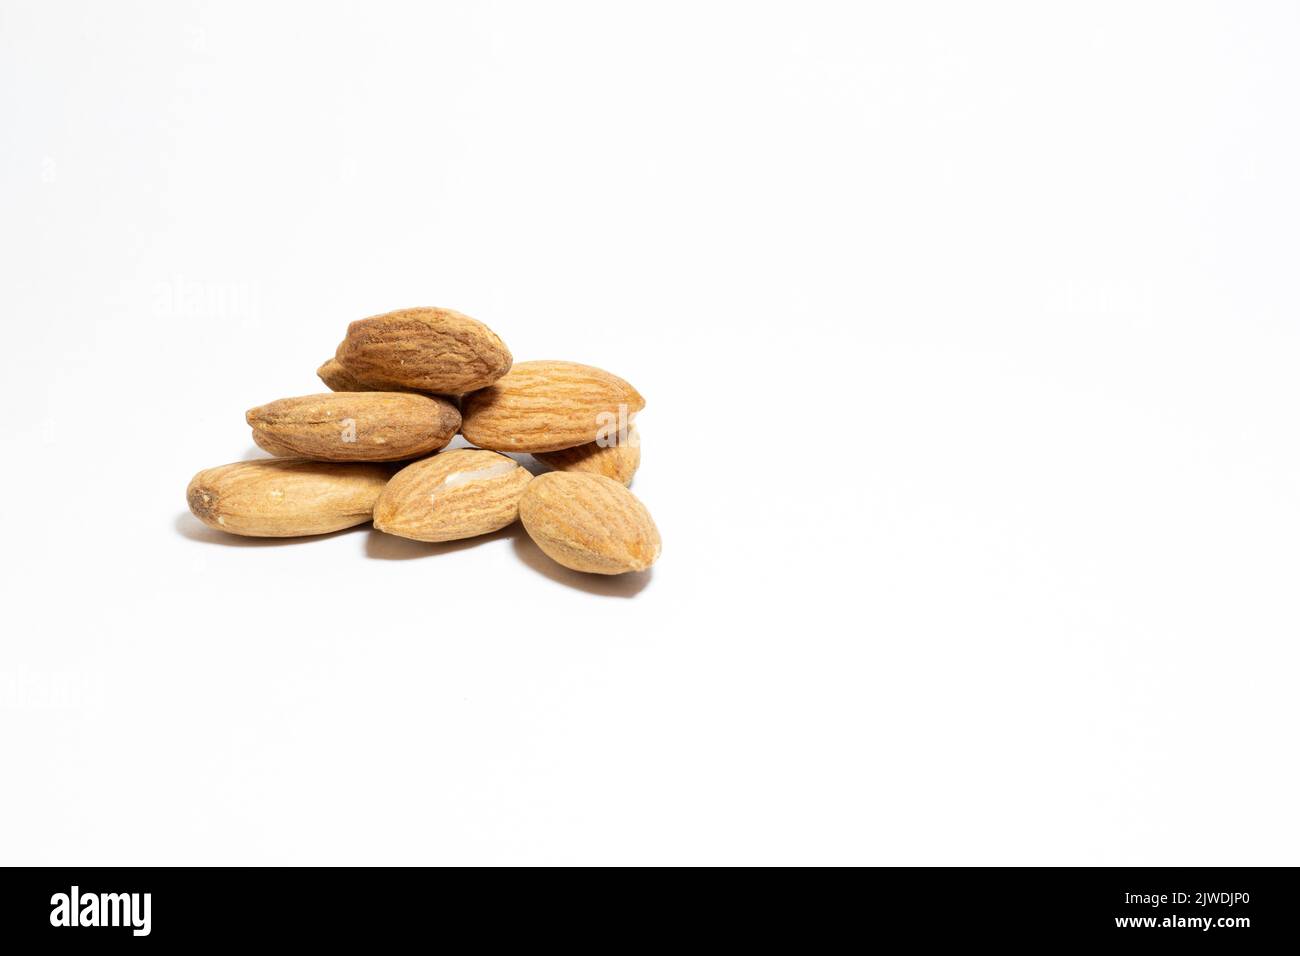 Group almonds isolated on white background. Pile of roasted almonds. Healthy food idea concept. Copy space, space for text. Empty area. No people. Stock Photo